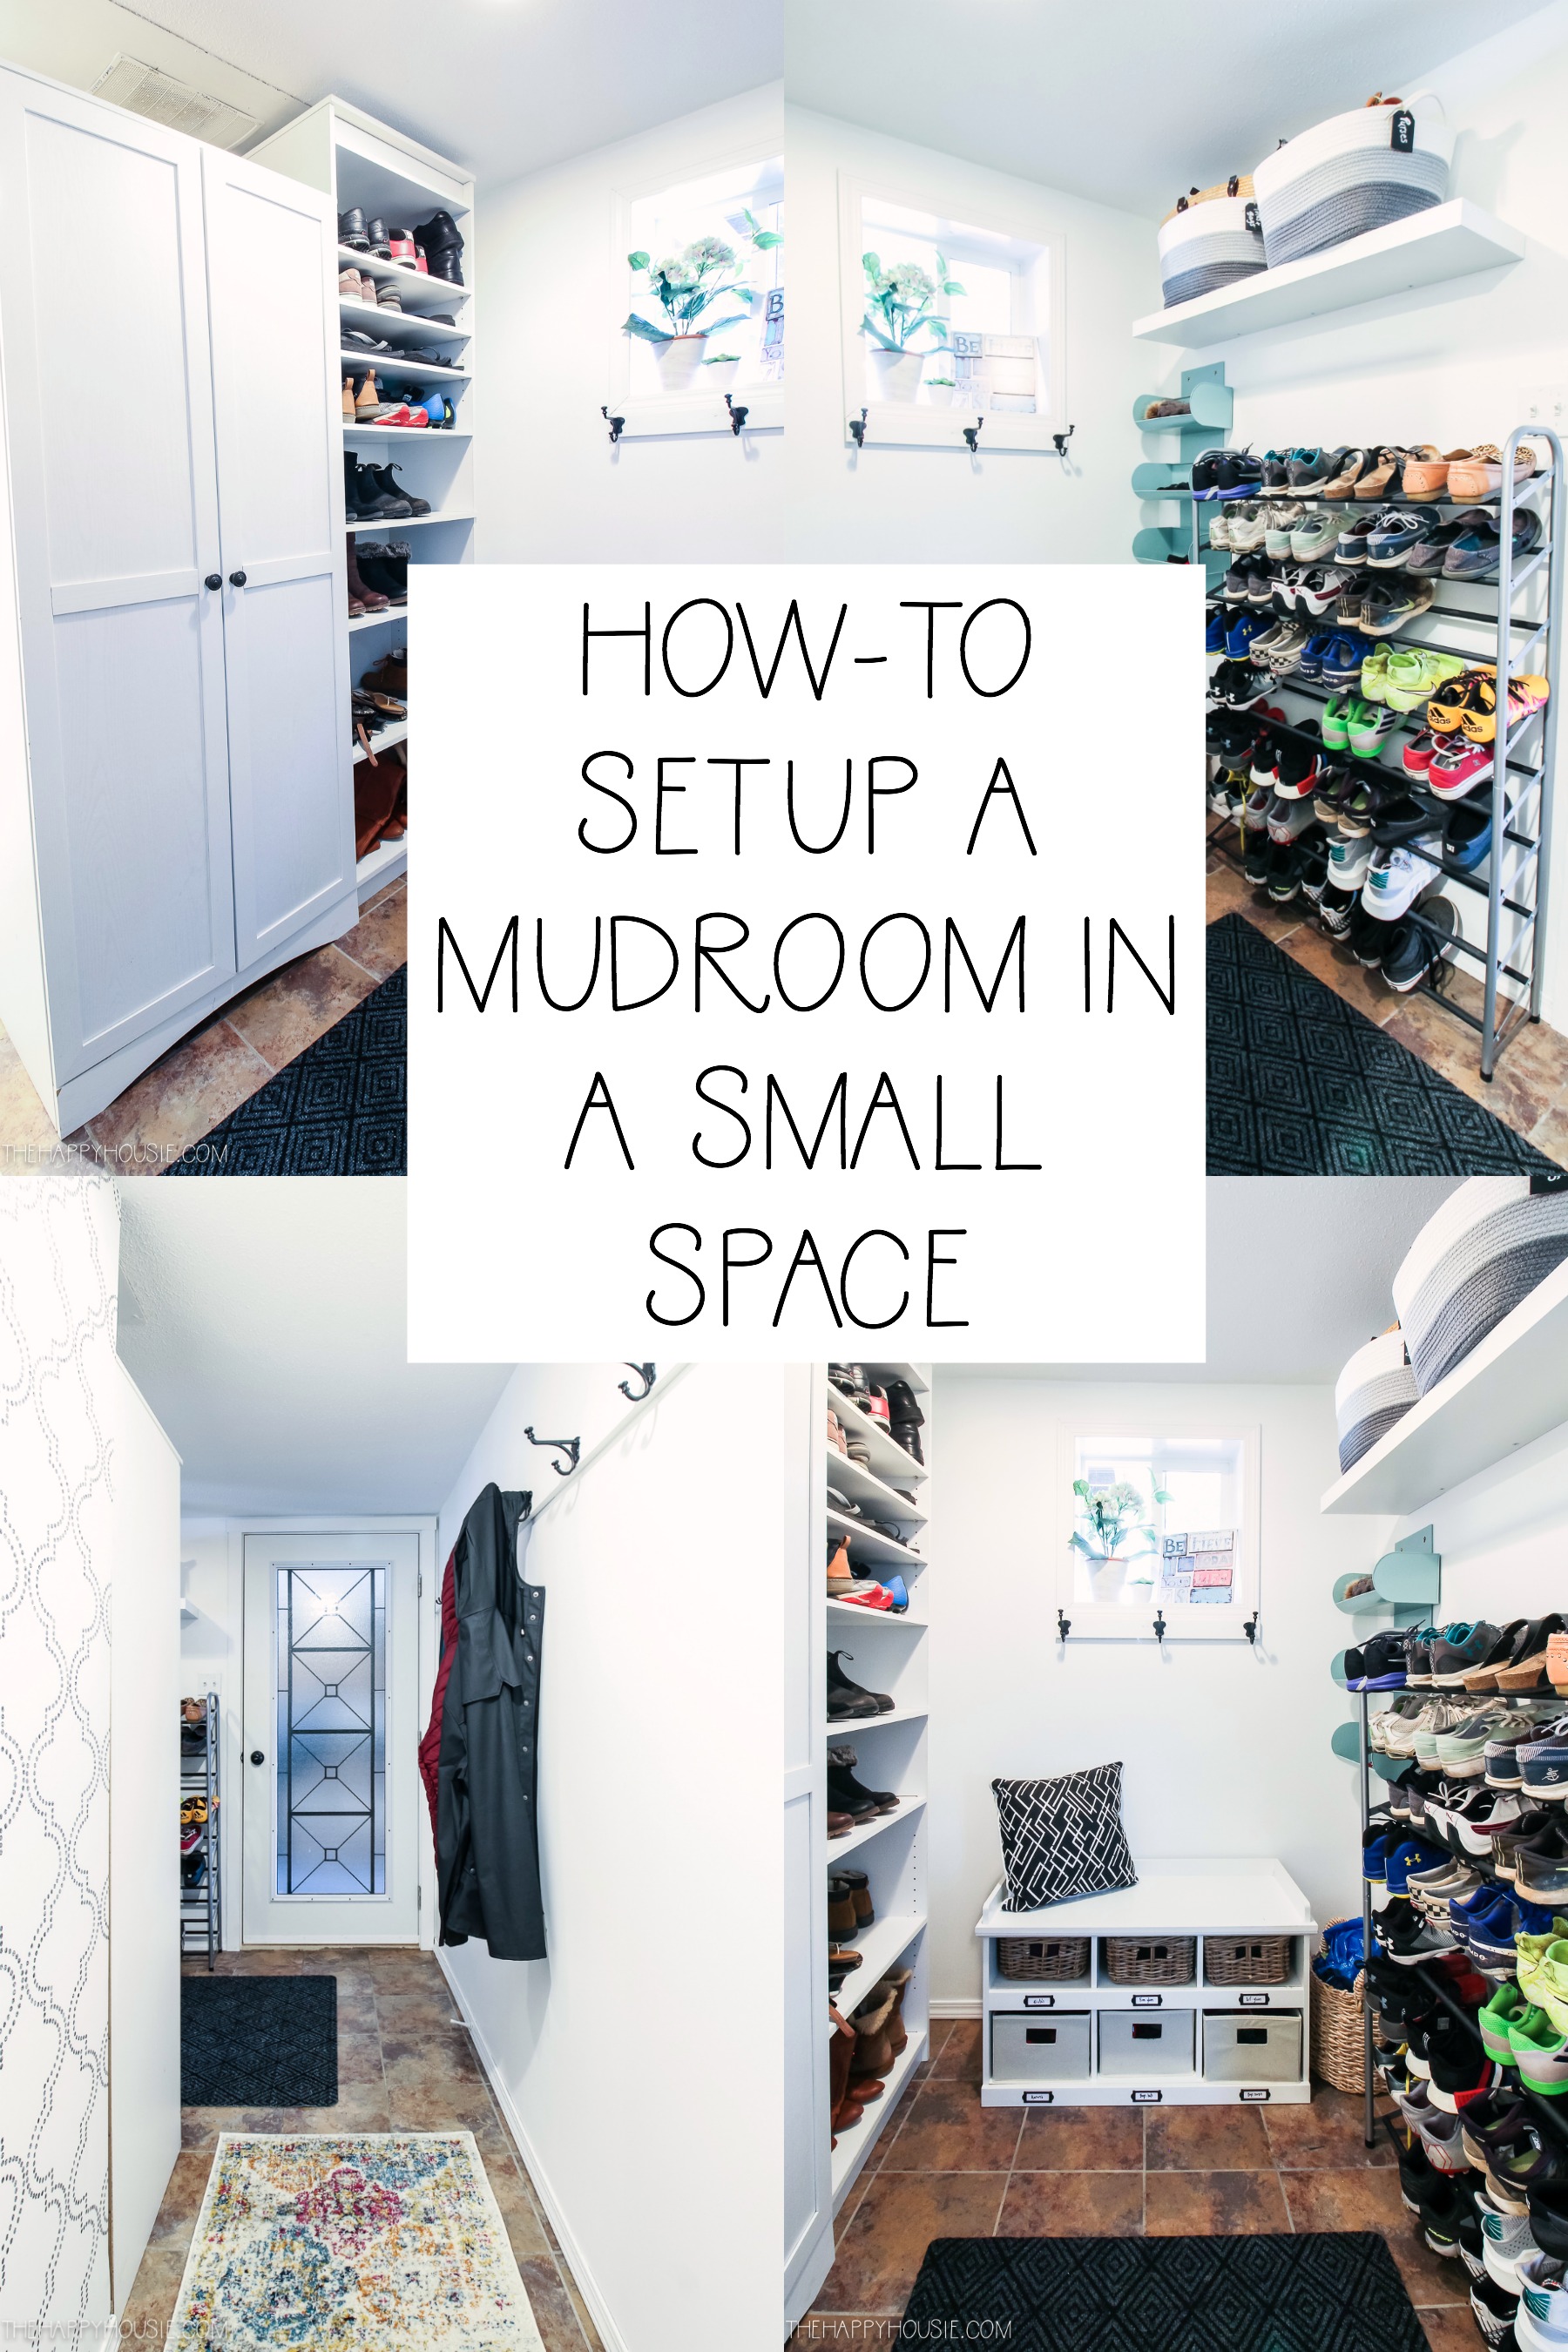 How to setup a mudroom in a small space poster.